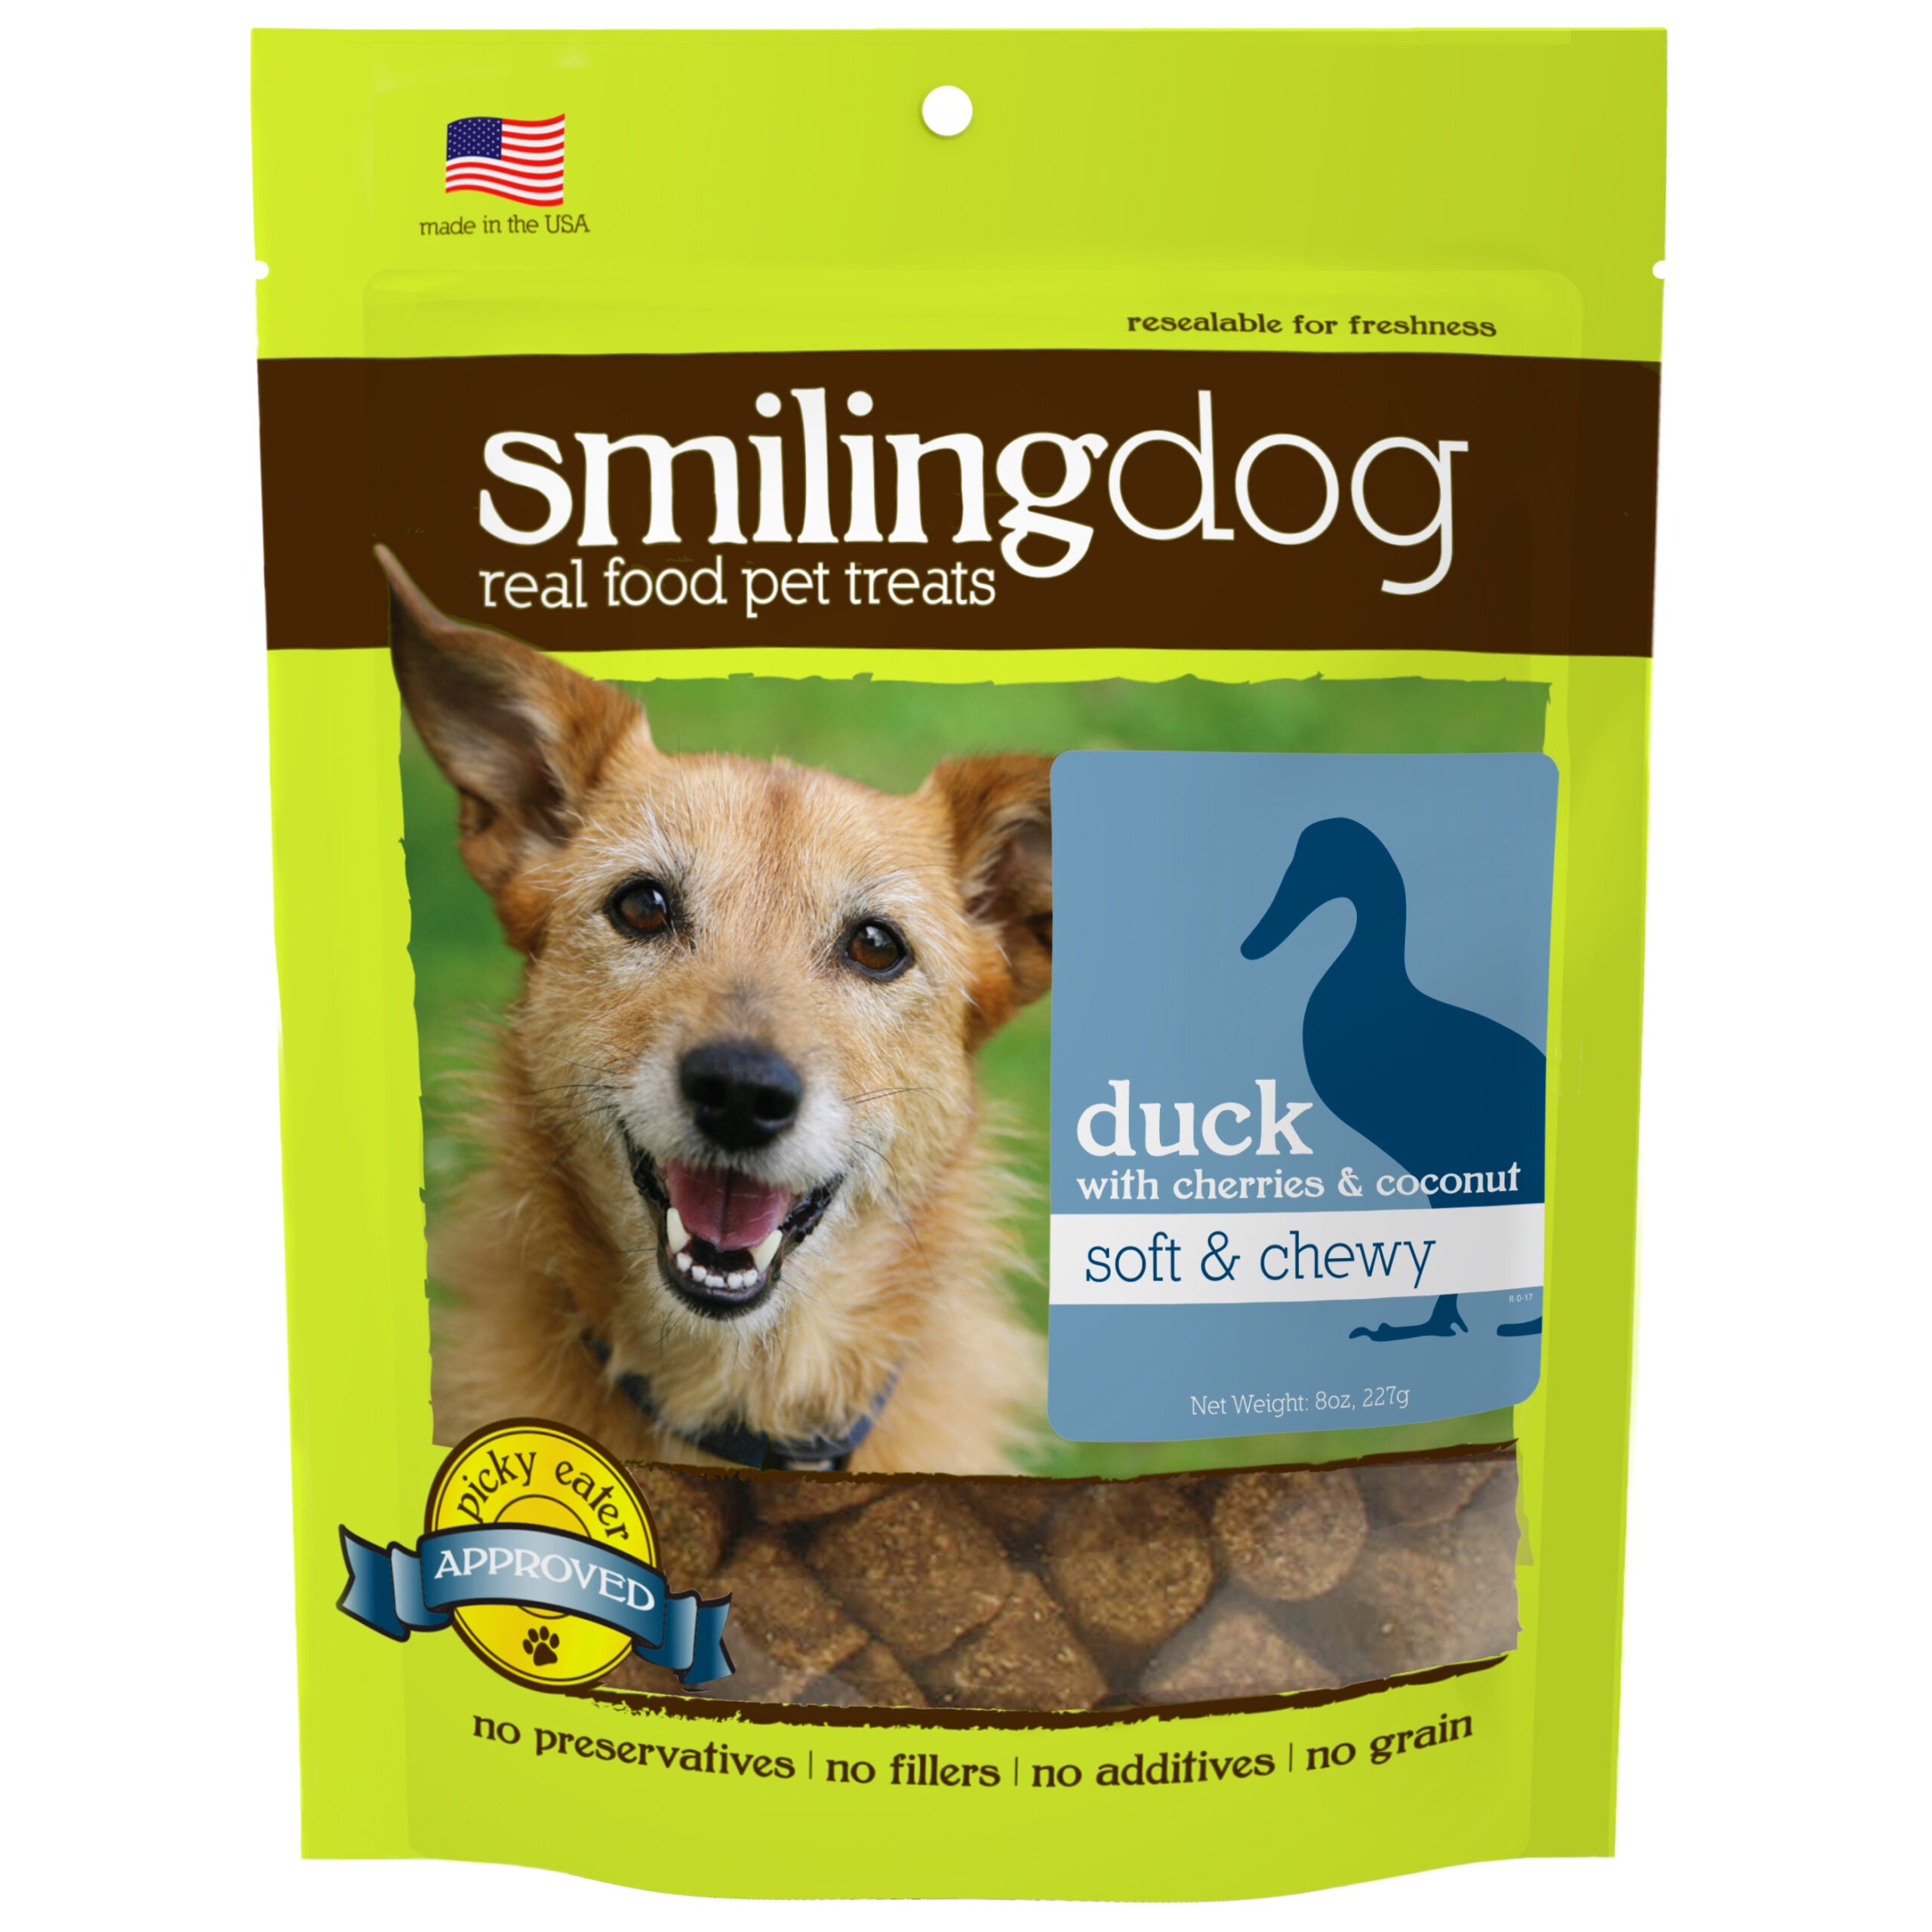 Herbsmith Smiling Dog Soft & Chewy Treats for Dogs (4 pack)